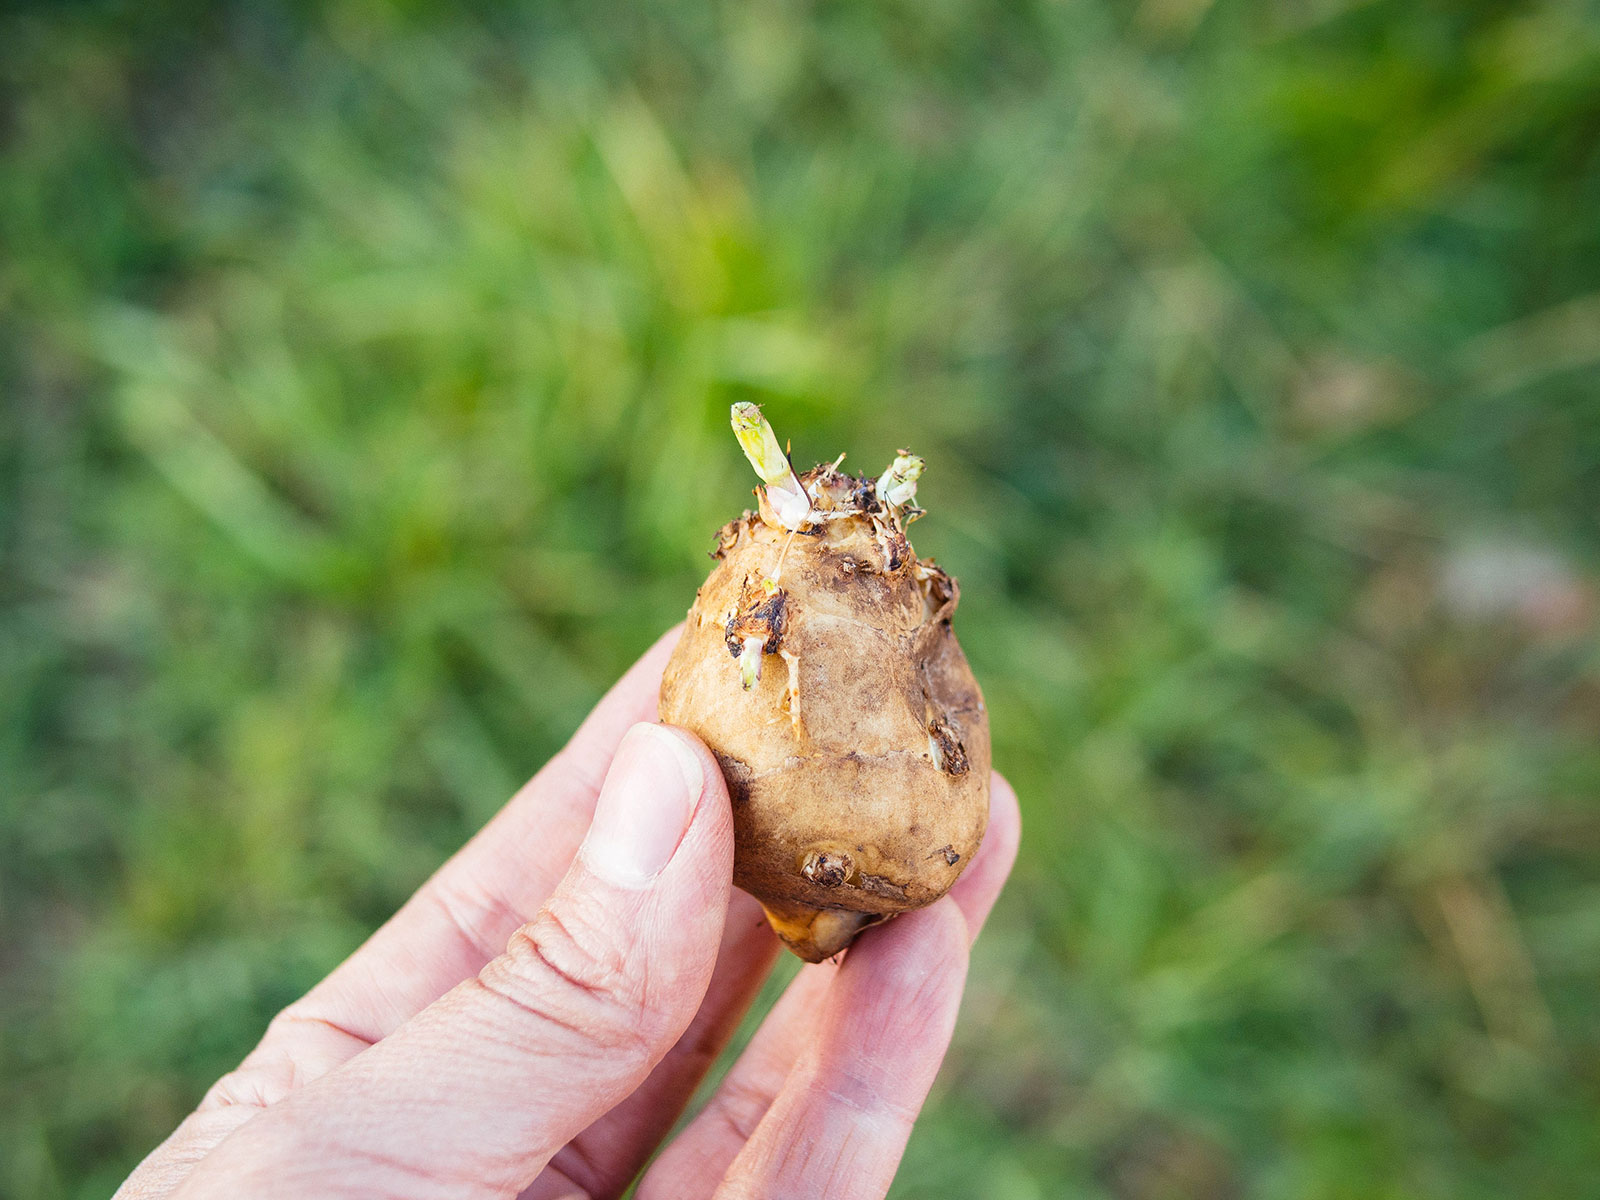 Hand holding a sprouted sunchoke tuber